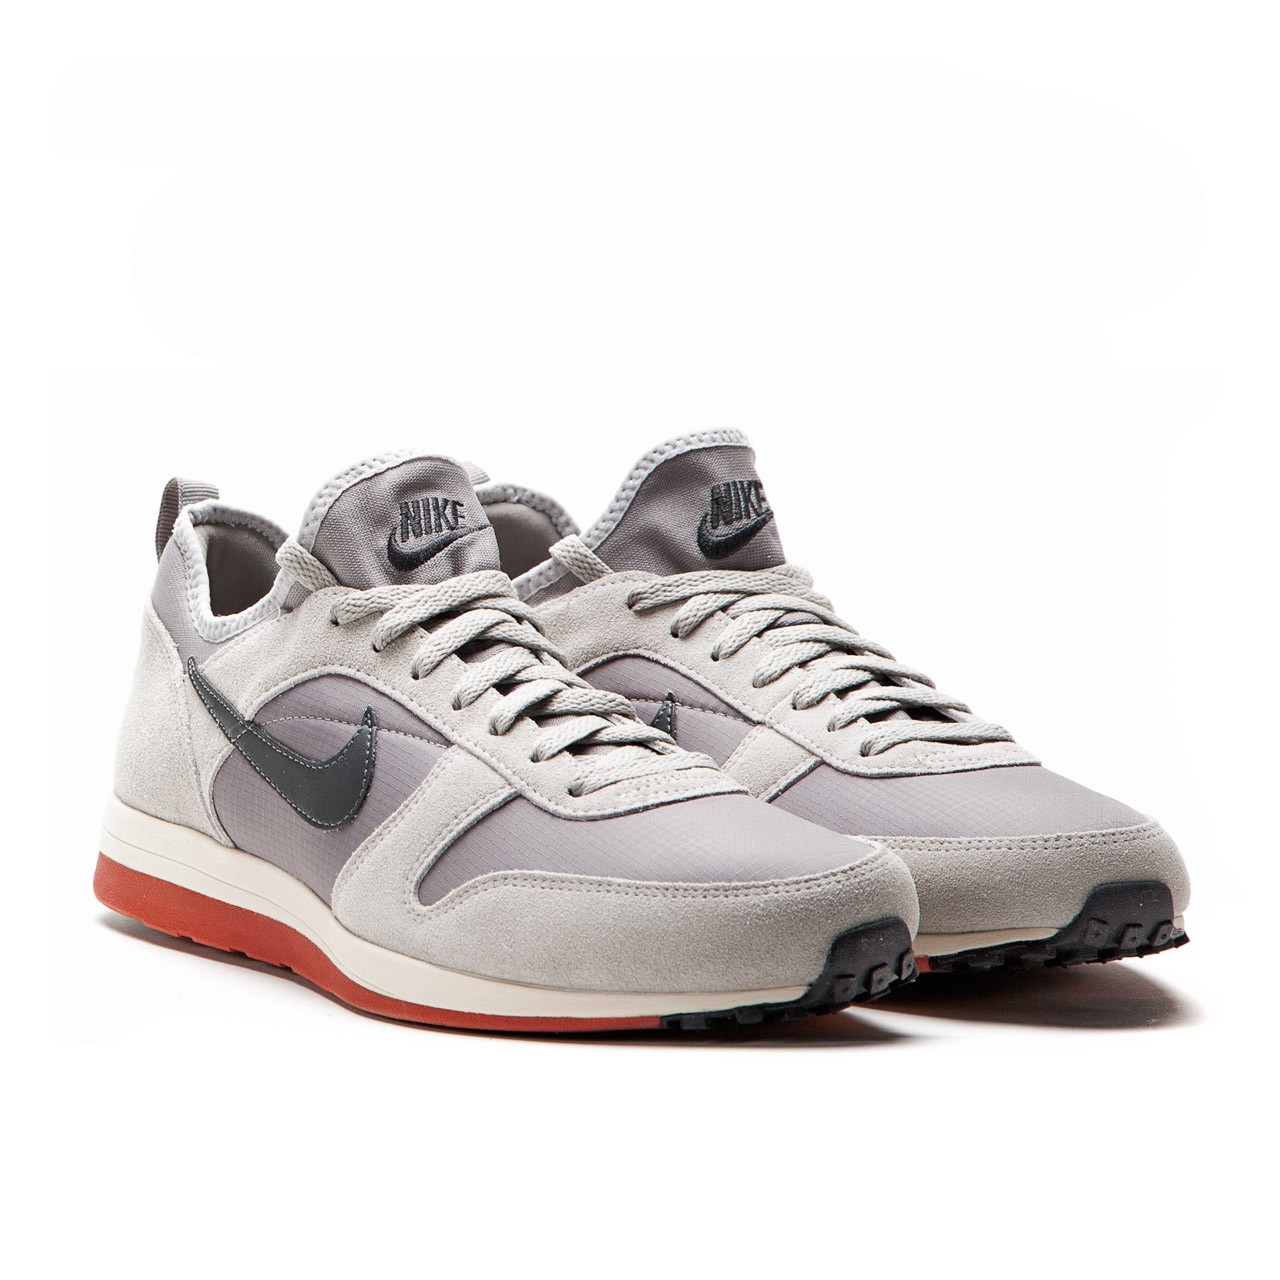 nike-archive-_75.m-light-charcoal-anthracite-2_1